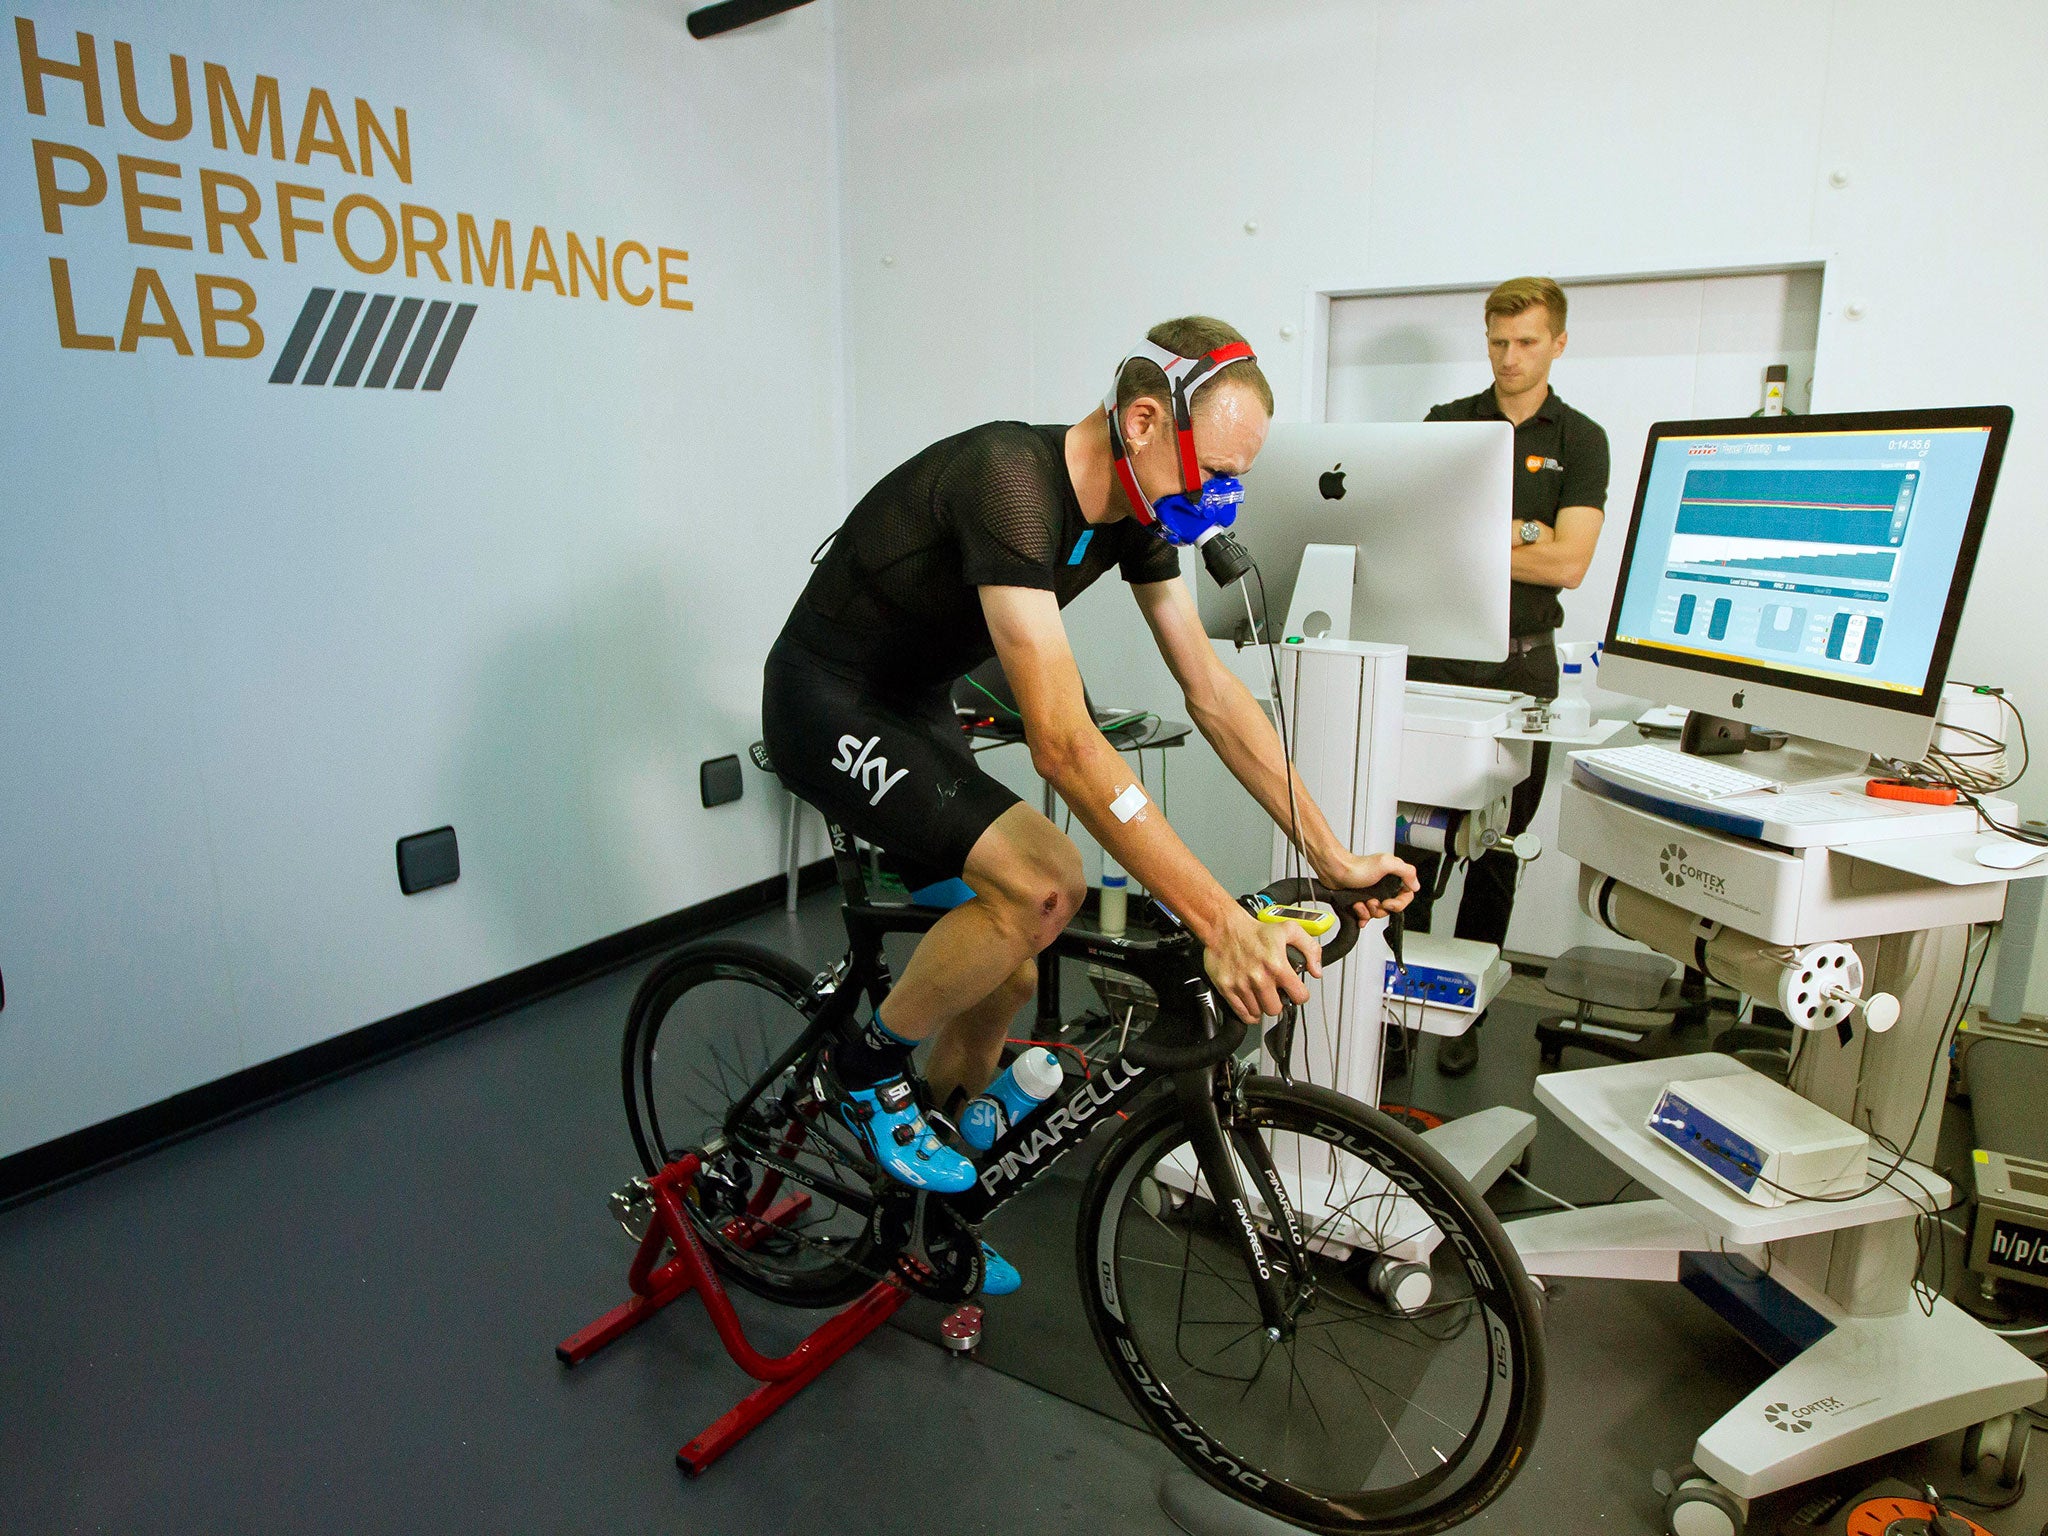 Chris Froome at the GSK Human Performance Laboratory in London